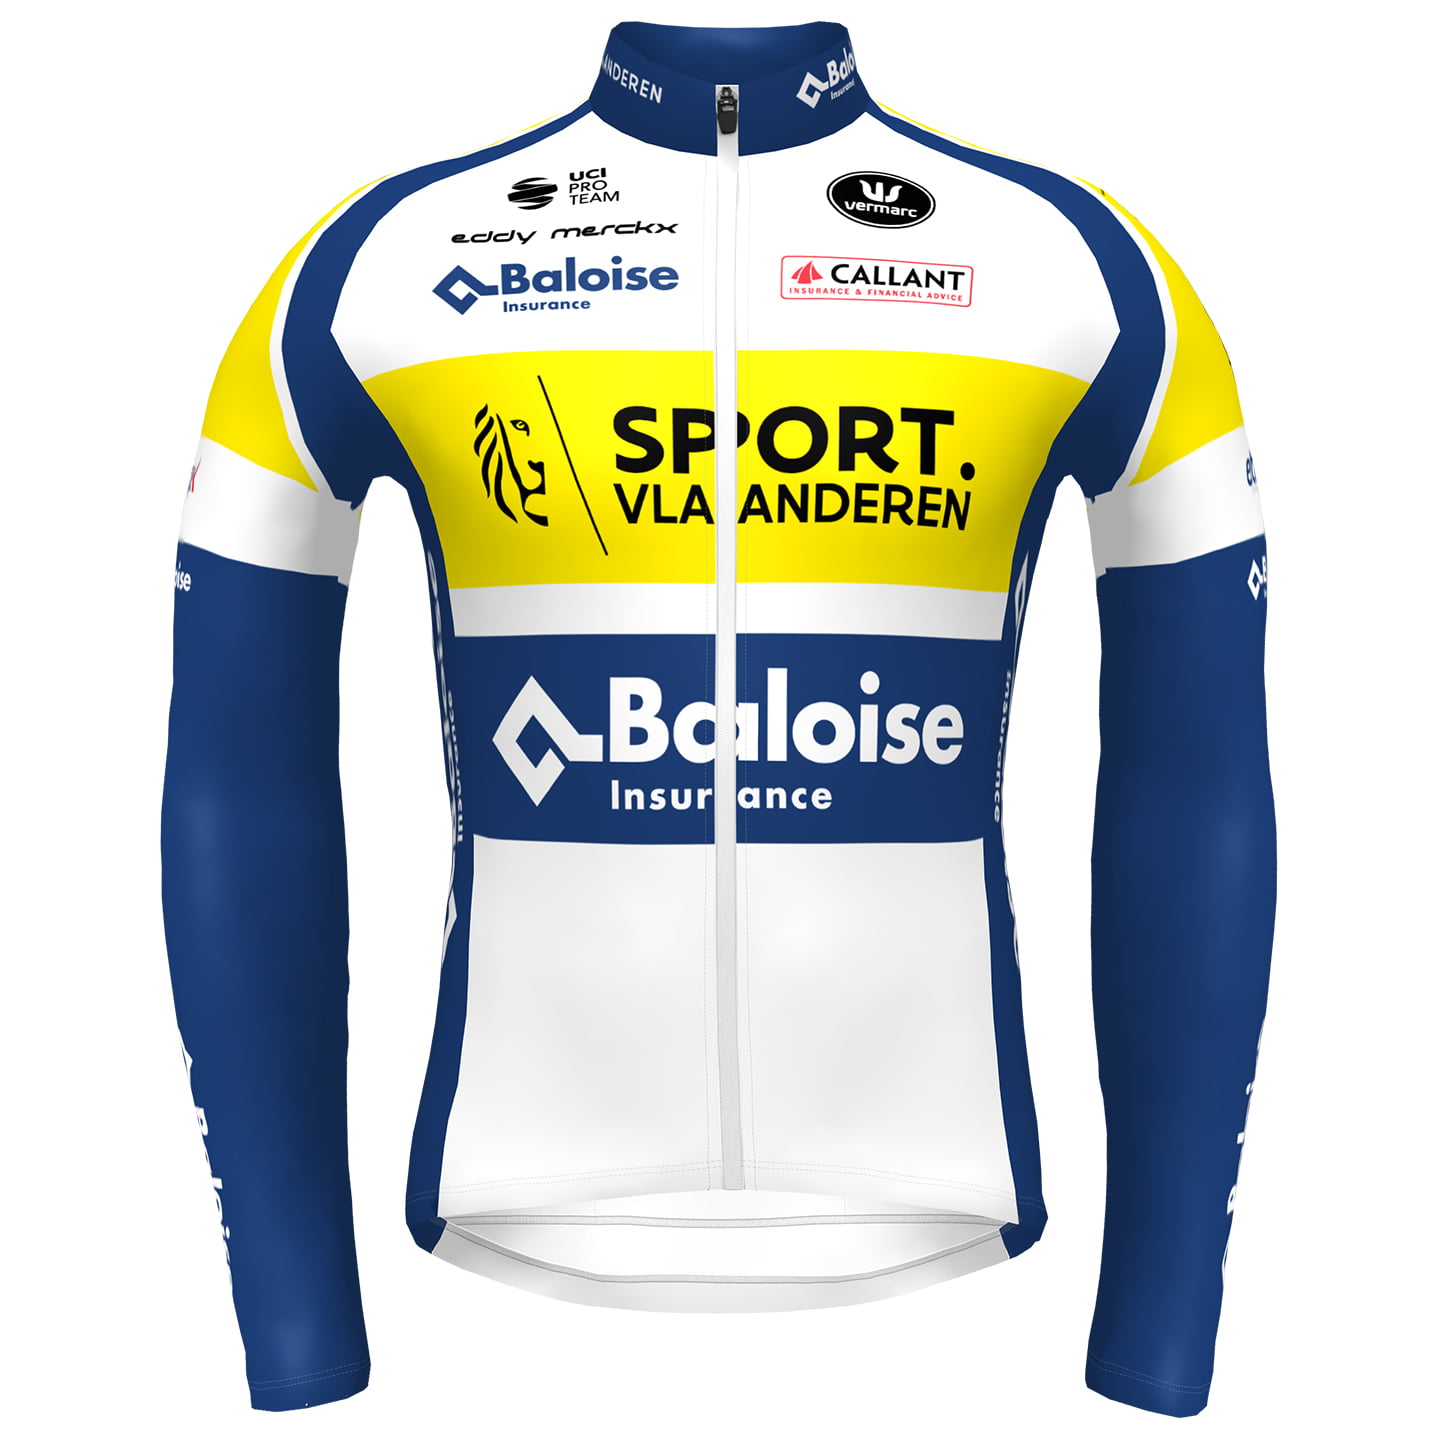 SPORT VLAANDEREN-BALOISE 2022 Long Sleeve Jersey, for men, size S, Cycling jersey, Cycling clothing